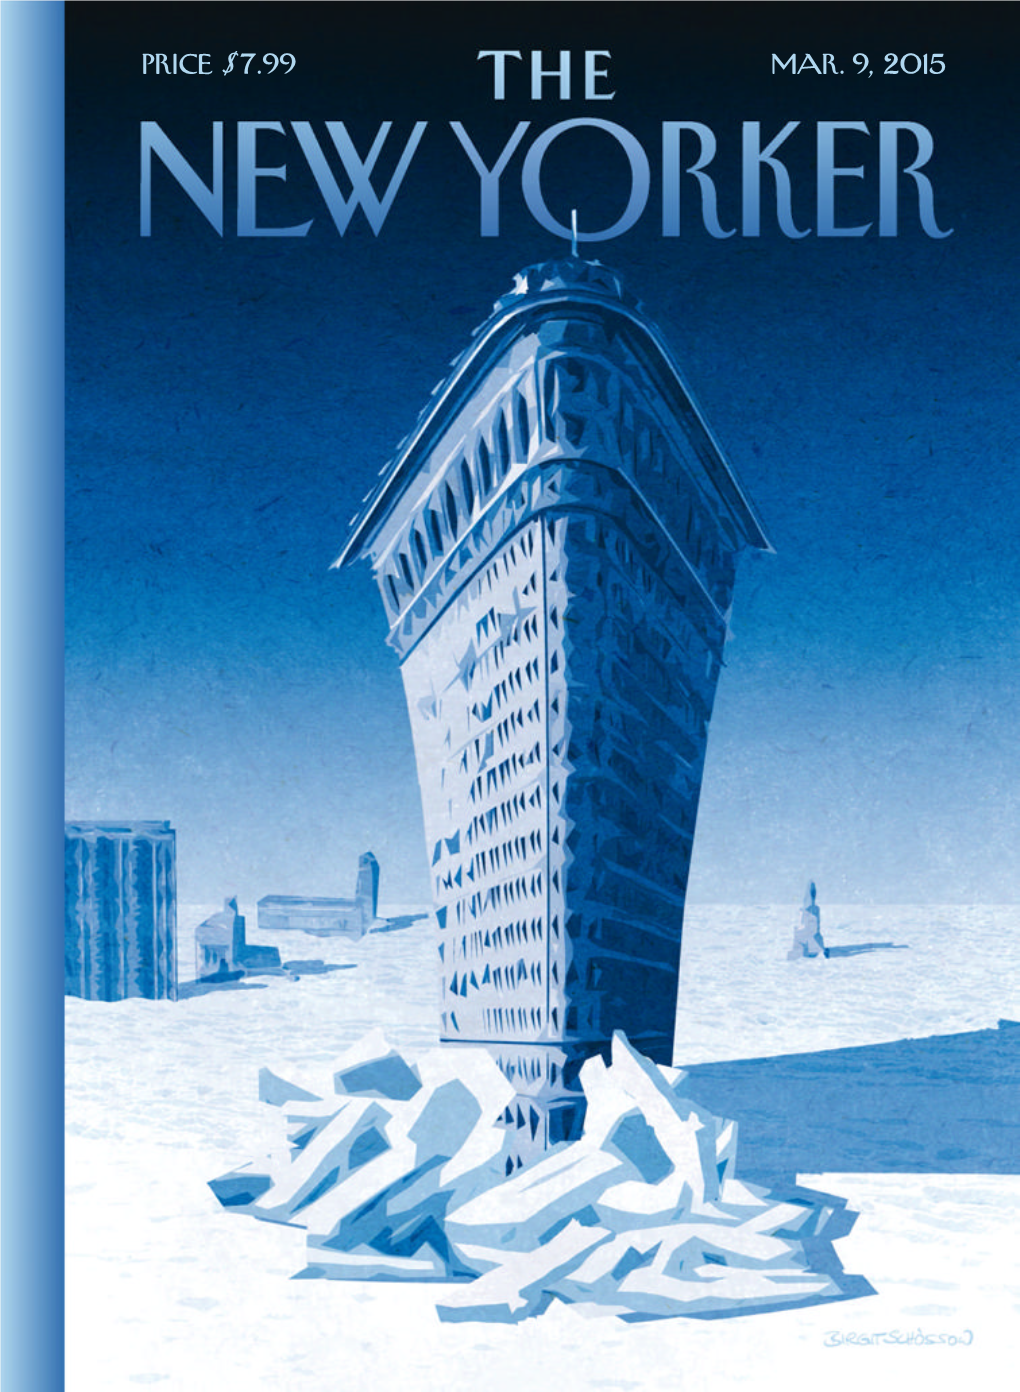 The New Yorker, March 9, 2015